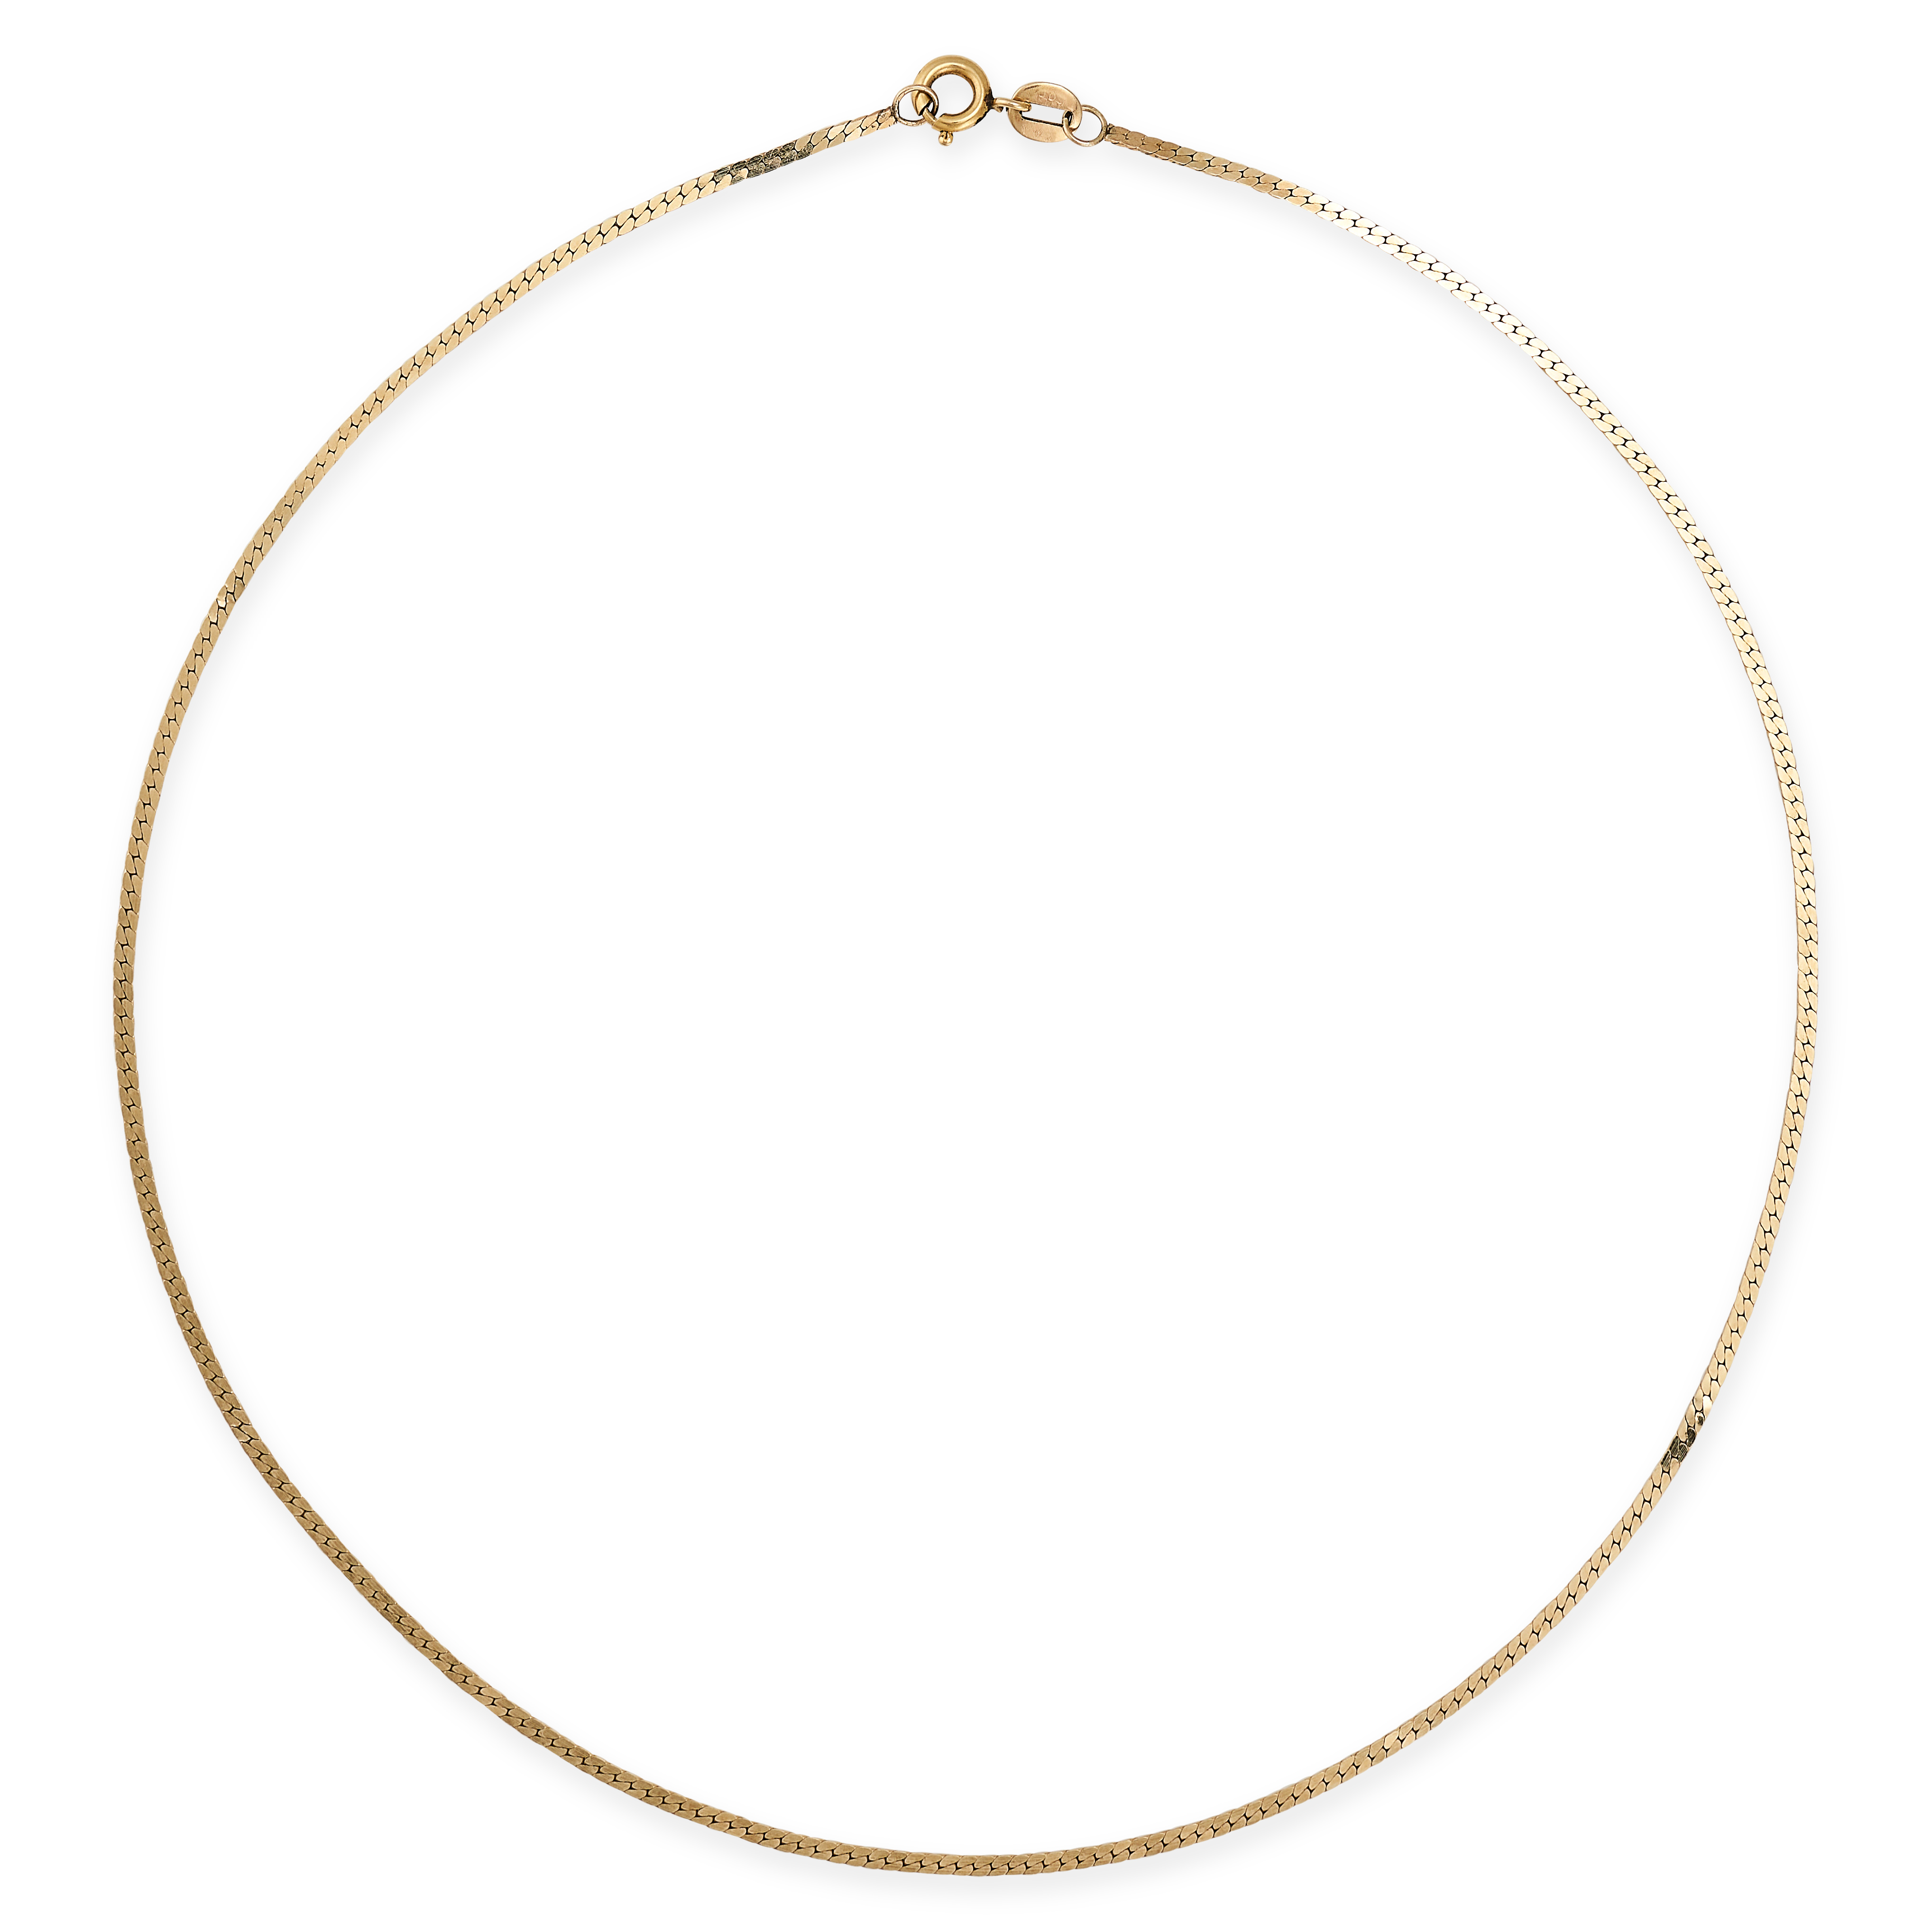 A GOLD SNAKE CHAIN NECKLACE in 14ct yellow gold, formed of flat snake links, stamped 585, 41.0cm,...